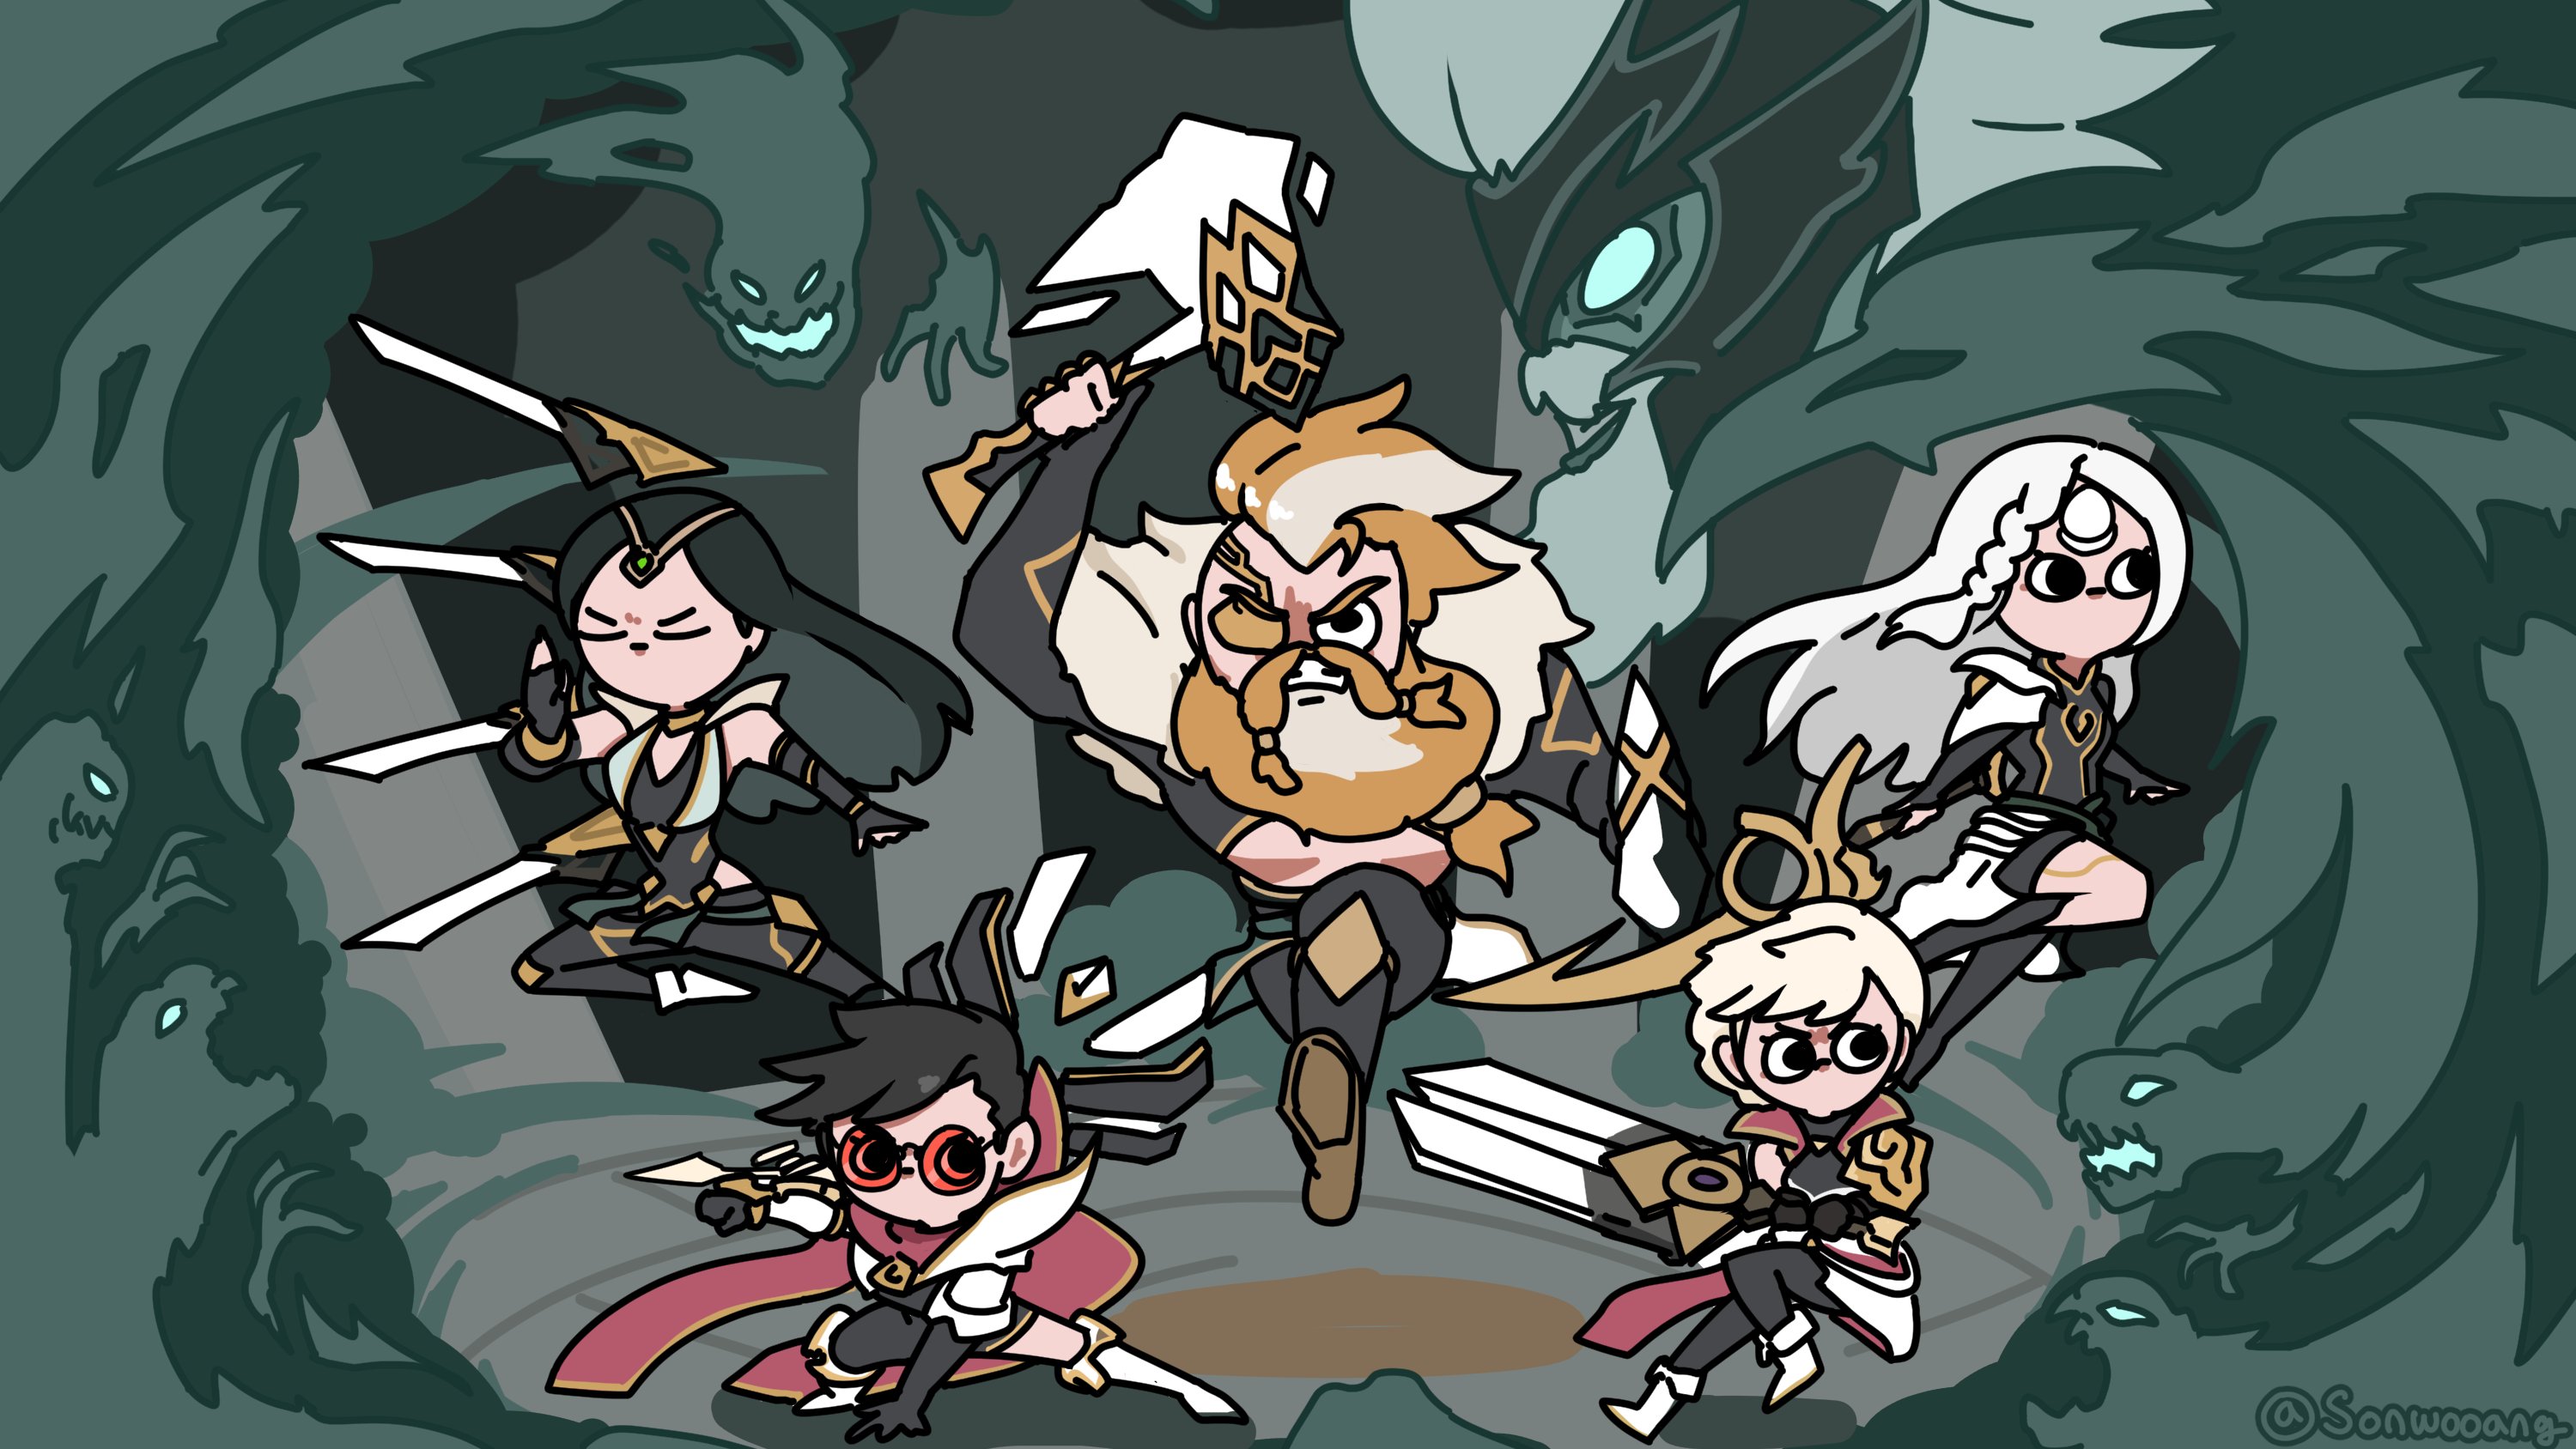 General 3000x1688 League of Legends Riot Games Irelia (League of Legends) Vayne (League of Legends) Olaf (League of Legends) Riven (League of Legends) Diana (League of Legends) Pantheon (League of Legends) sonwooang video game girls video game characters Ruined artwork fan art illustration digital art PC gaming video game art